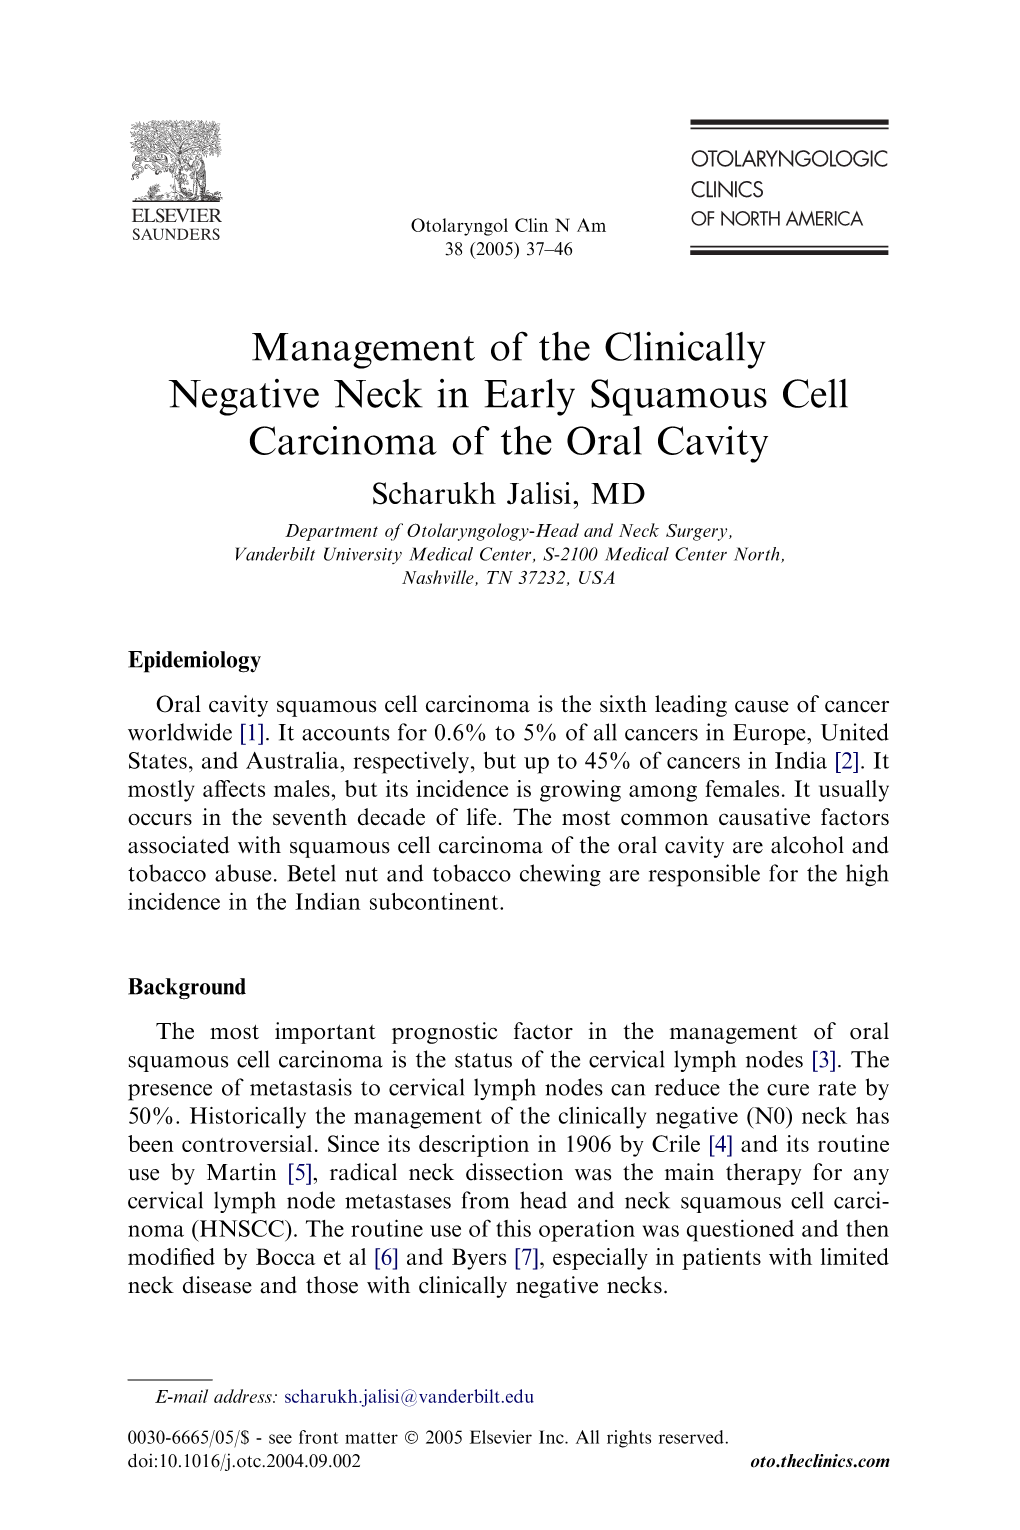 Management of the Clinically Negative Neck in Early Squamous